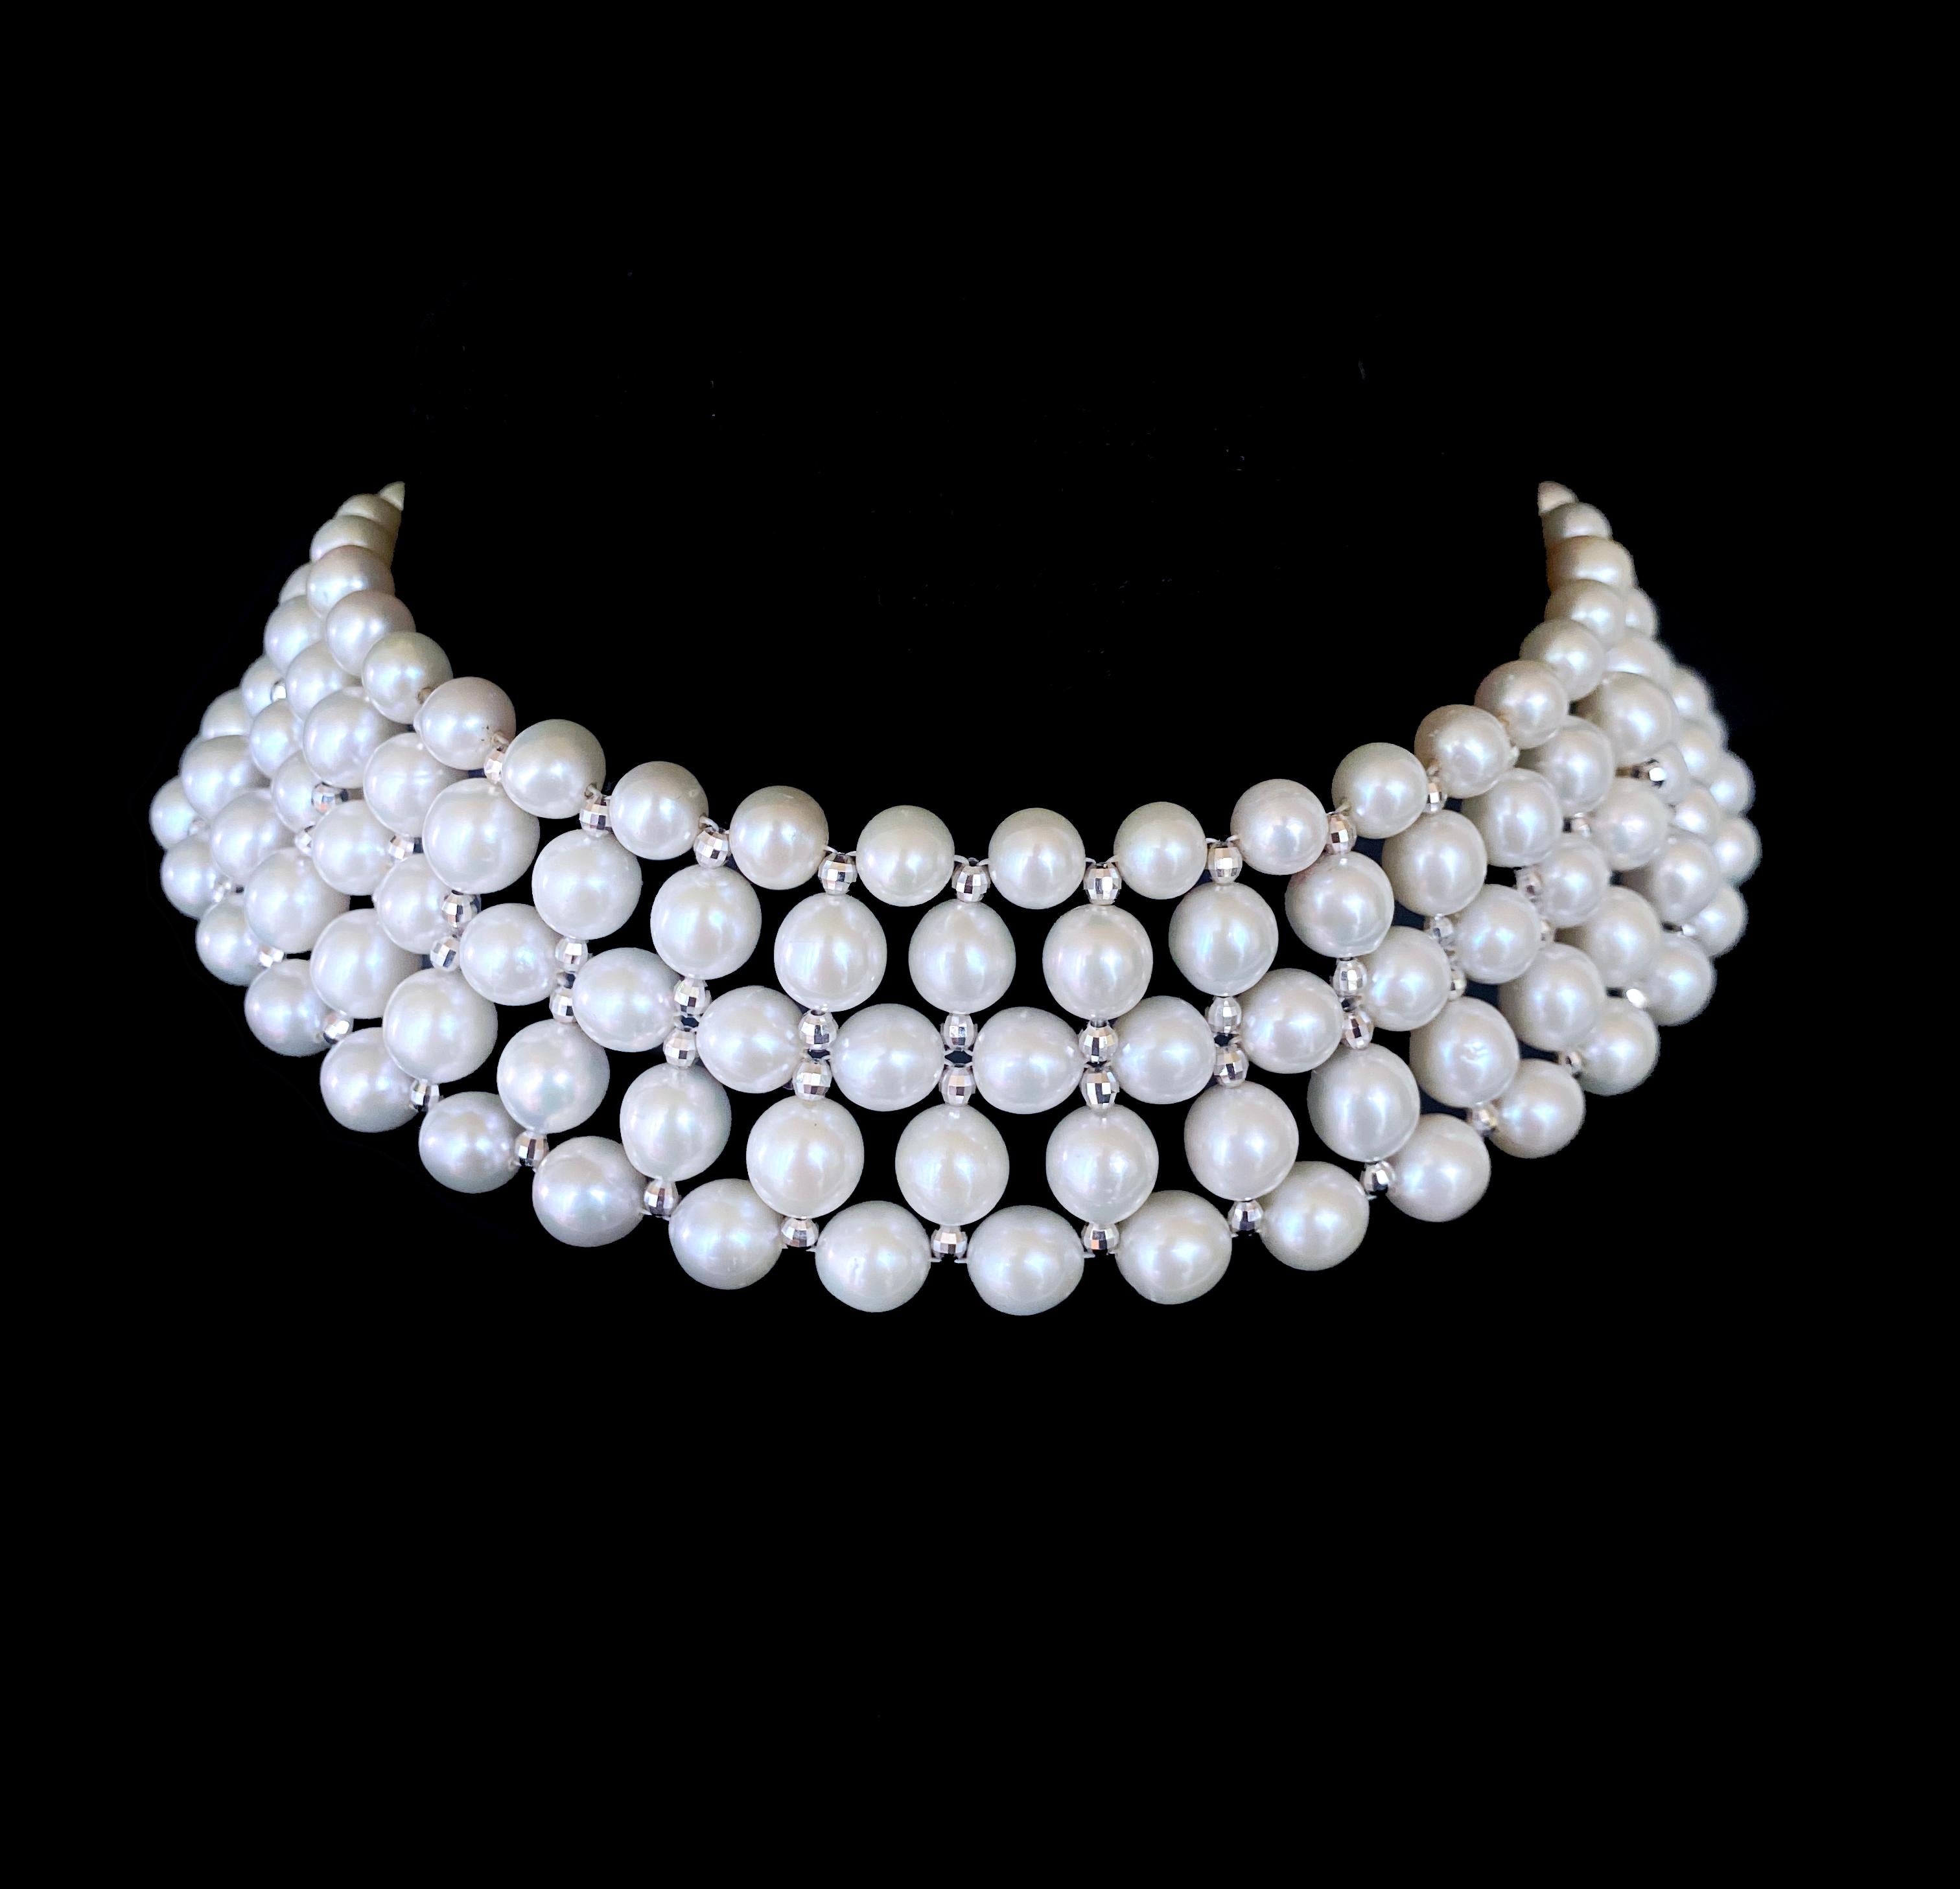 Made by Marina J. This beautiful choker features high luster White Pearls which display a wonderful sheen, all woven together into a beautiful and classic design. Faceted Rhodium Plated Silver beads are woven amongst the Pearls, adorning this